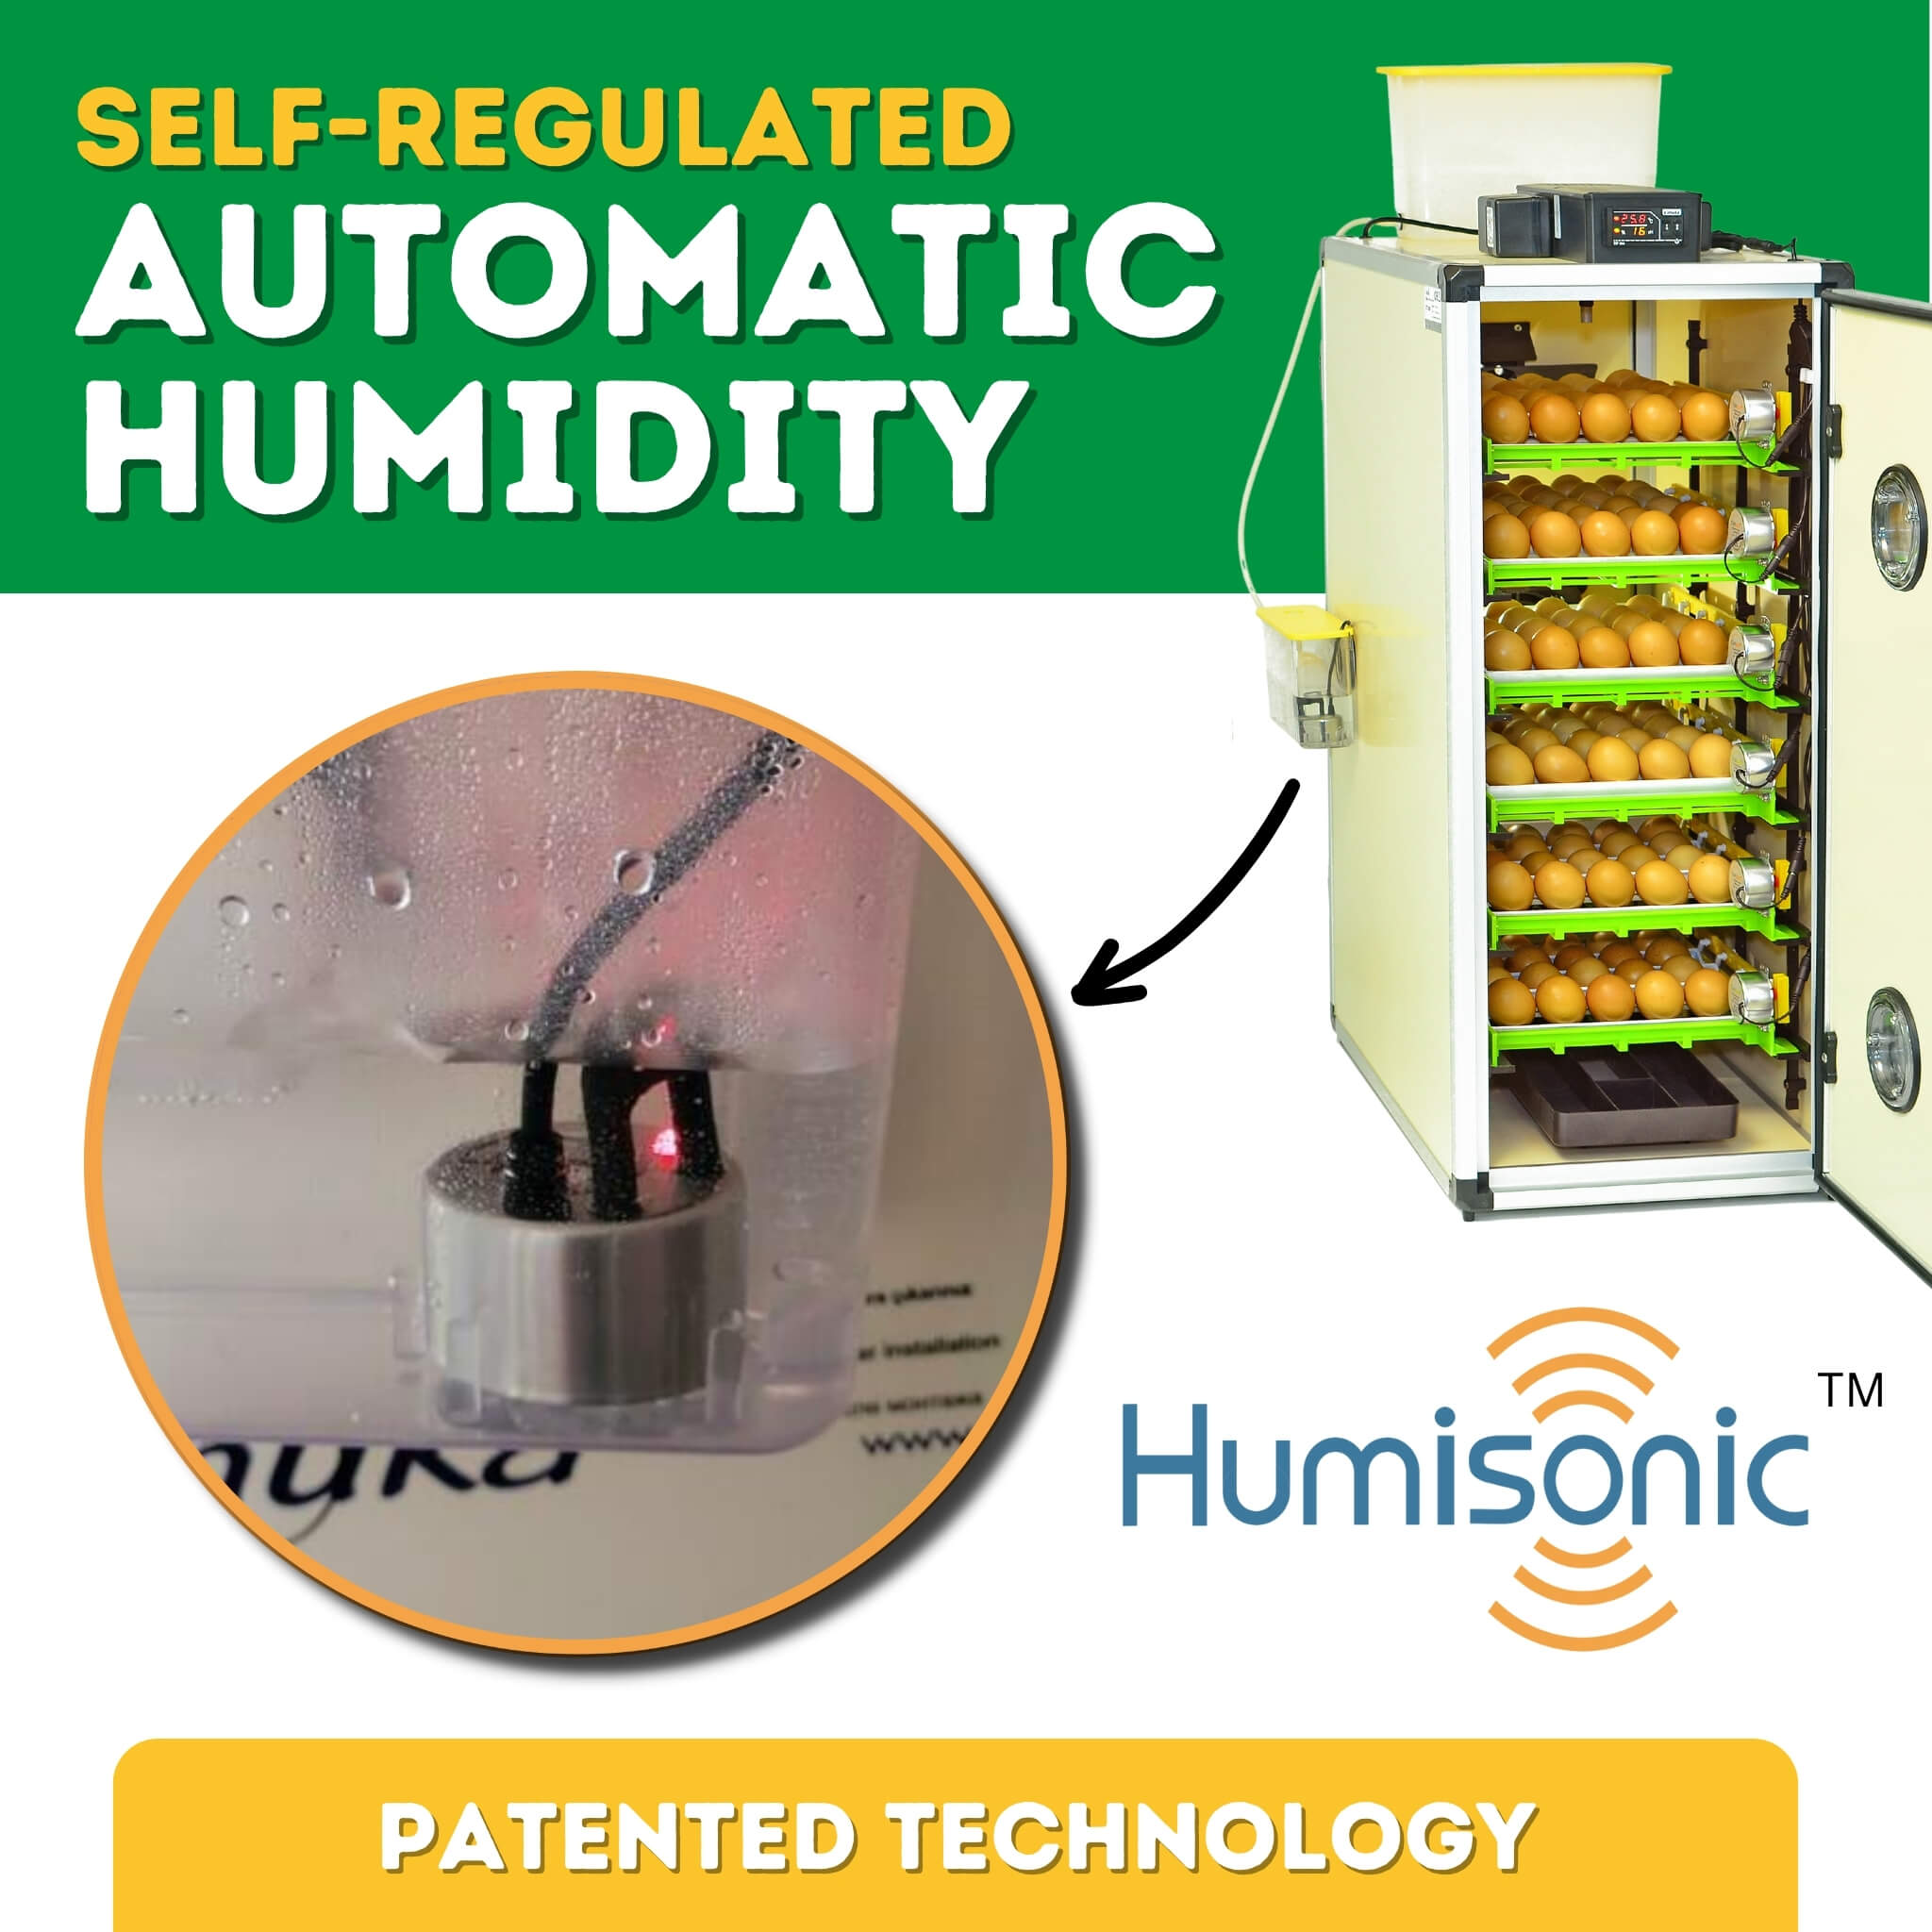 Hatching Time Cimuka. Infographic shows an open CT180 egg incubator with 4 full setting trays of brown chicken eggs. Digital control and water reservoir can be seen on top of tank connected to Humisonic Humidifier. Image text reads Self-regulated Automatic humidity. Humisonic Patented technology. A close up image of Humisonic humidifier can be seen in circular frame.